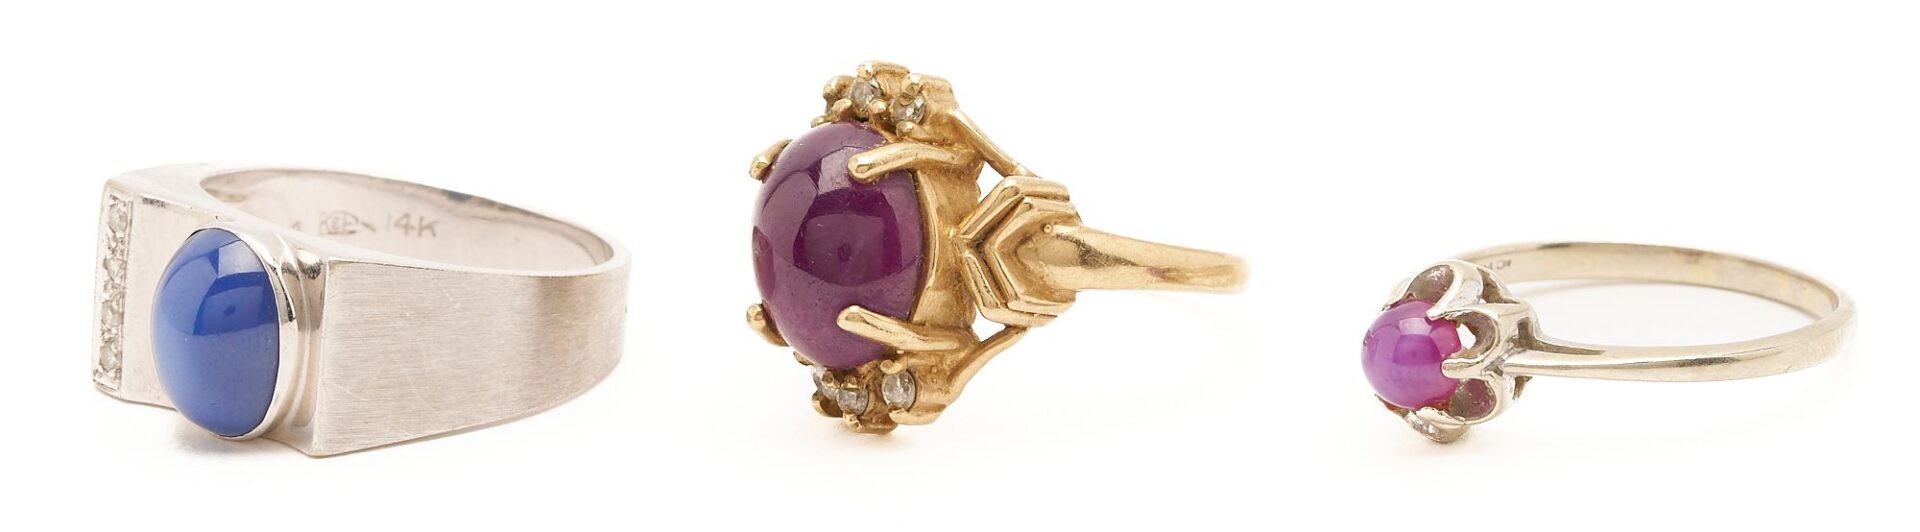 Lot 845: Two Gold & Cabochon Ruby Rings and one Gold & Sapphire Ring